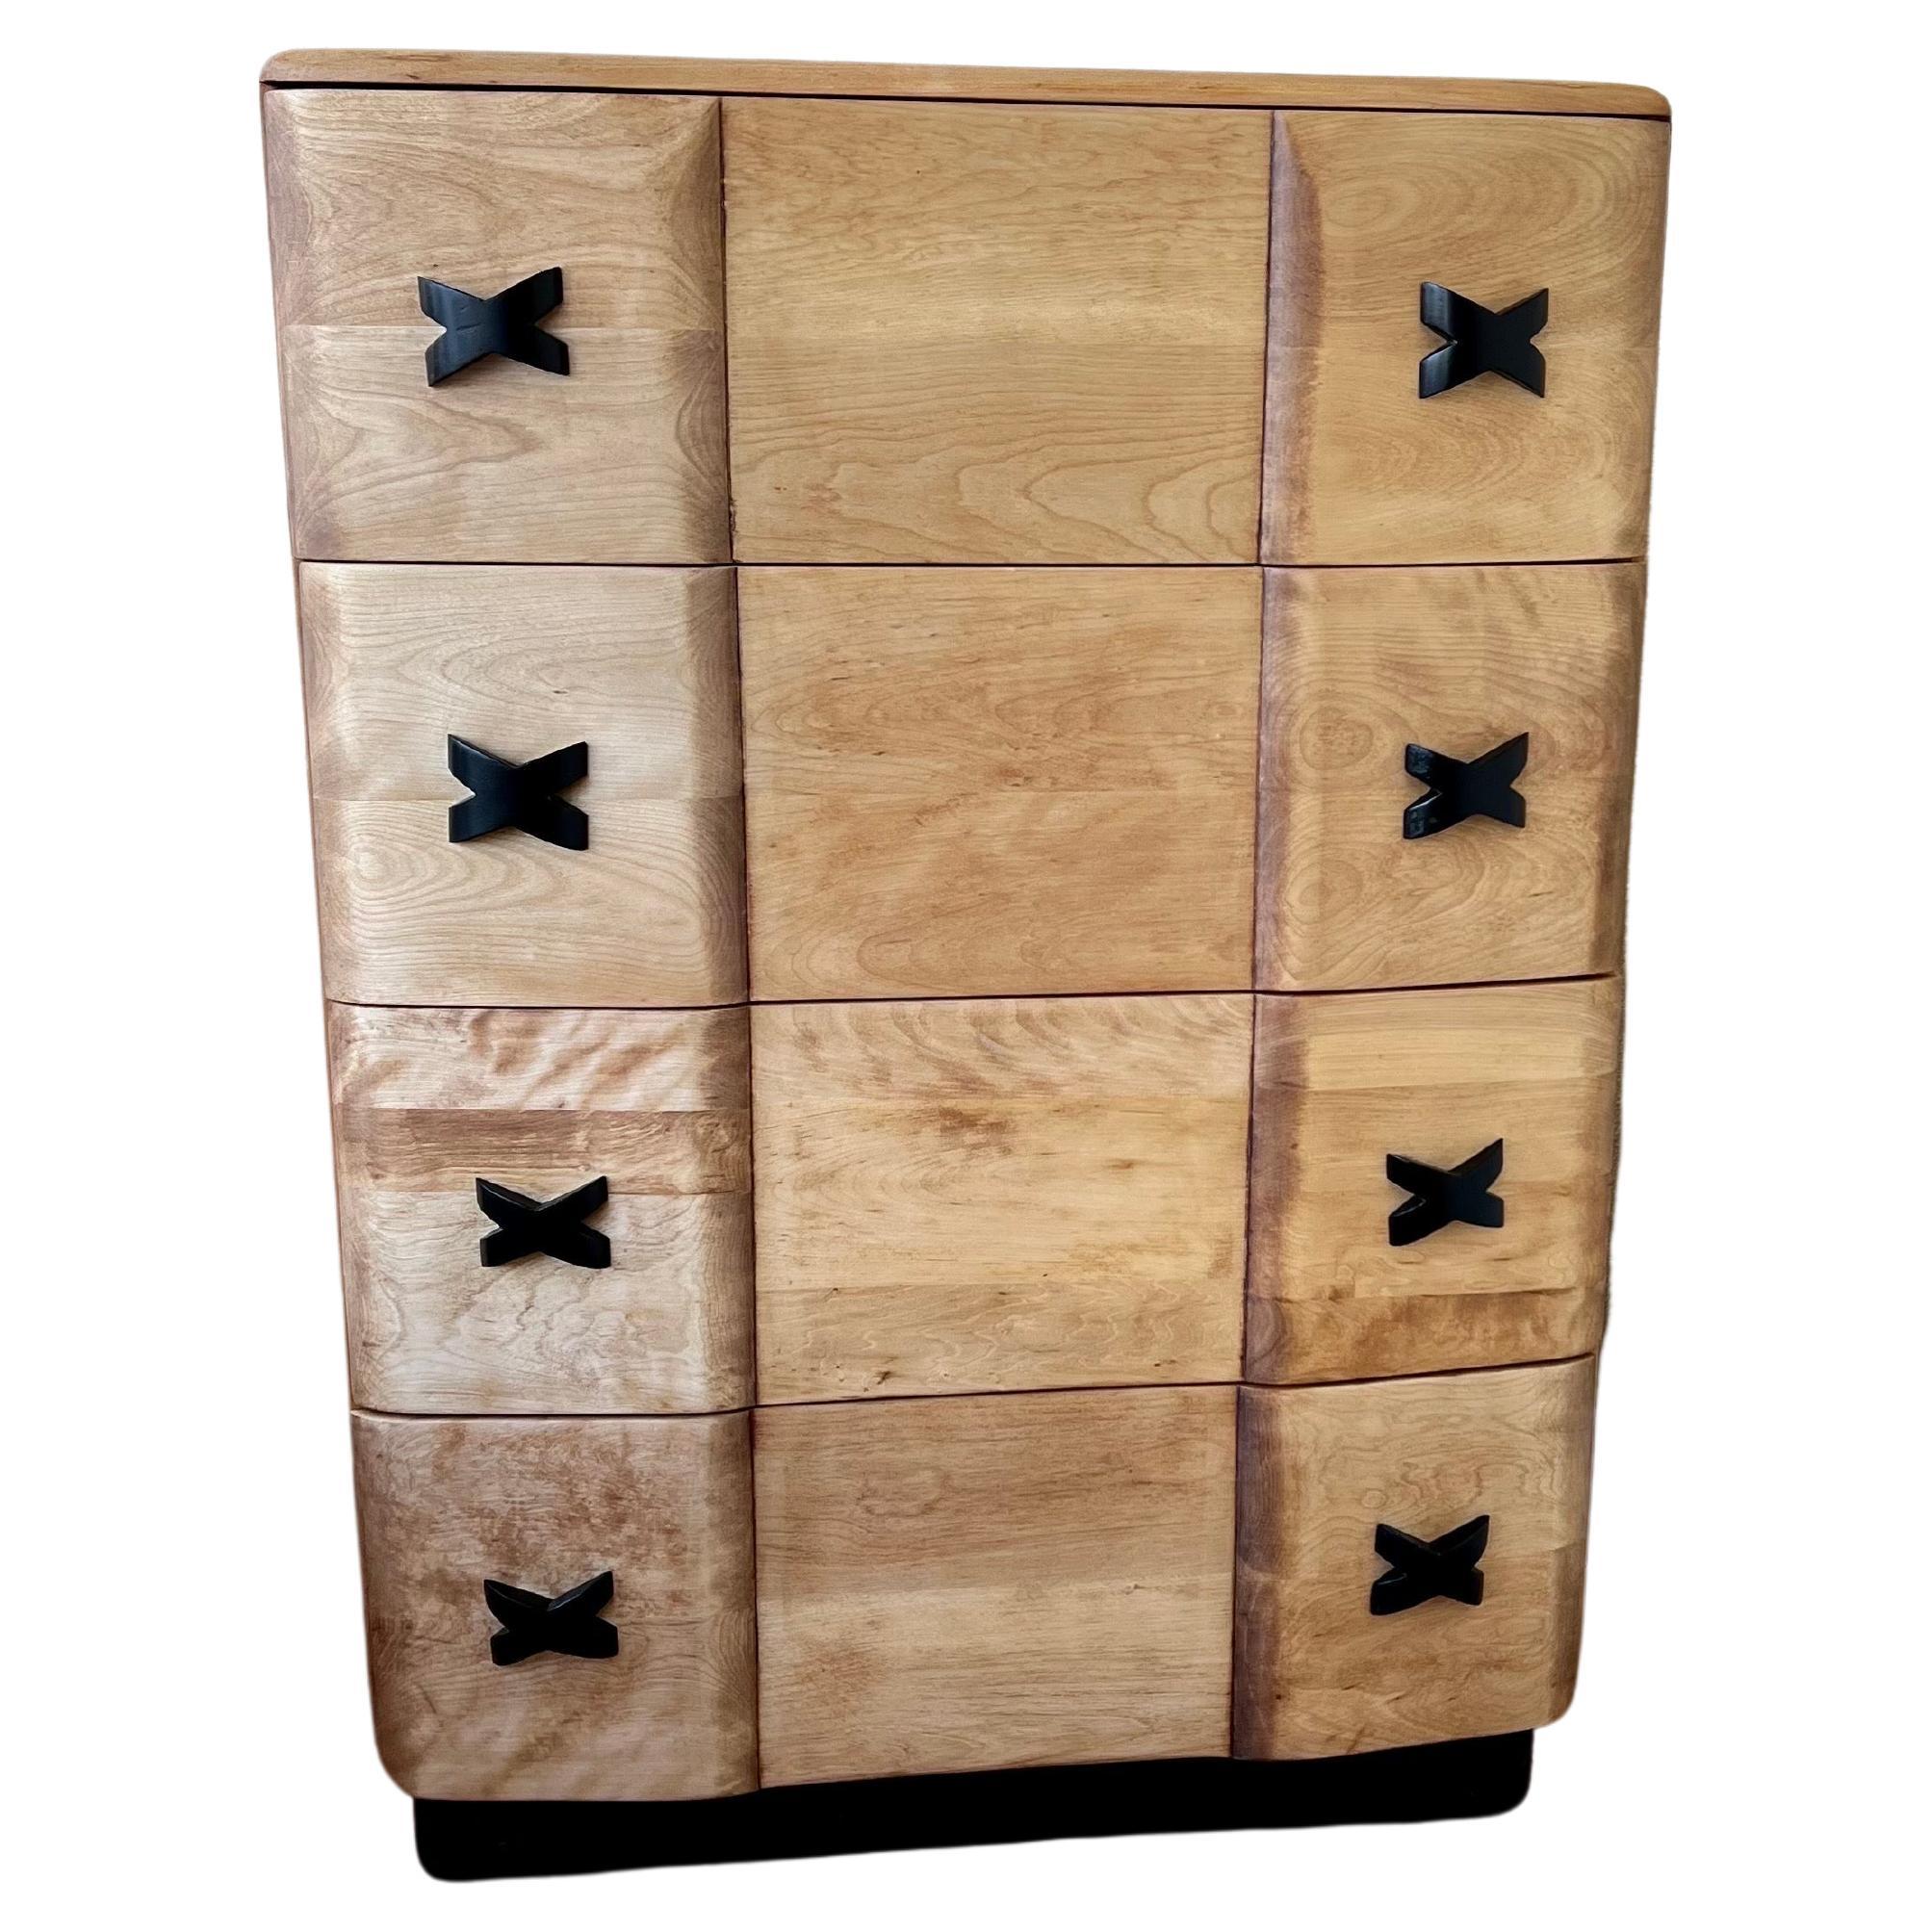 Fantastic tall boy chest of drawers by Heywood Wakefield, solid maple wood freshly refinished with black lacquer handles and base solid piece great looking.